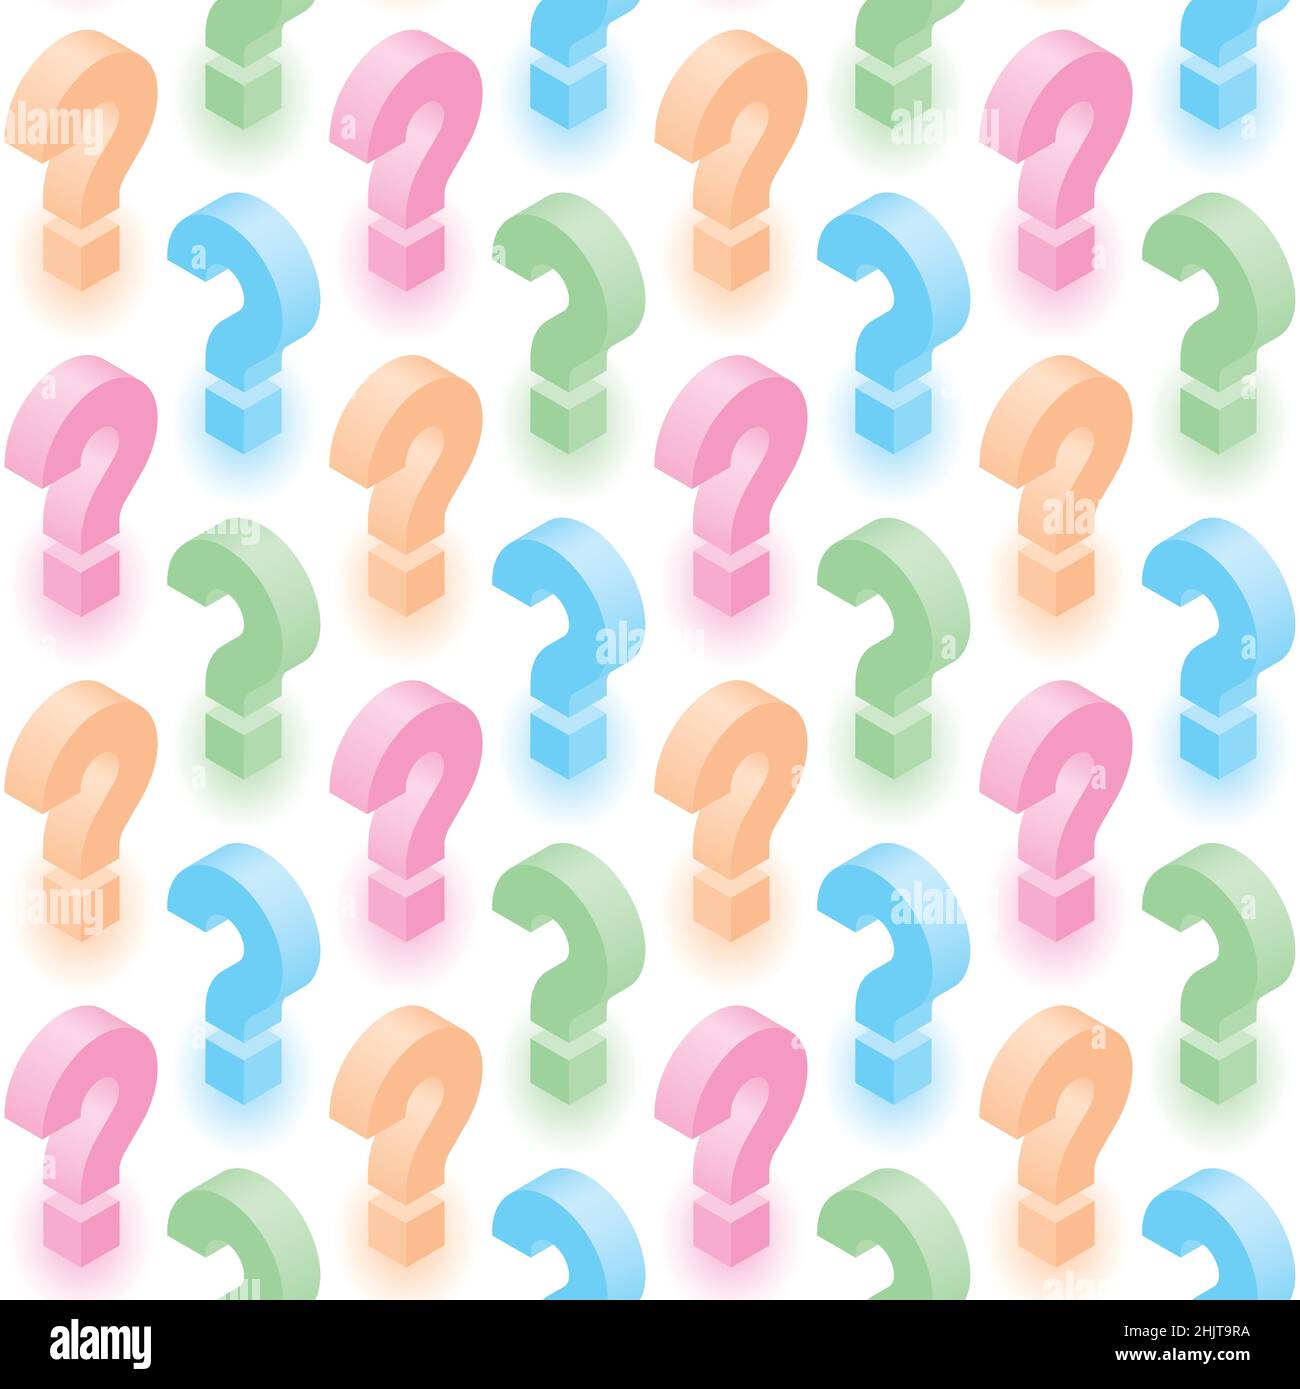 Childrens Quiz Isometric Background. Multicolor Question Marks Seamless Vector Pattern. Stock Vector